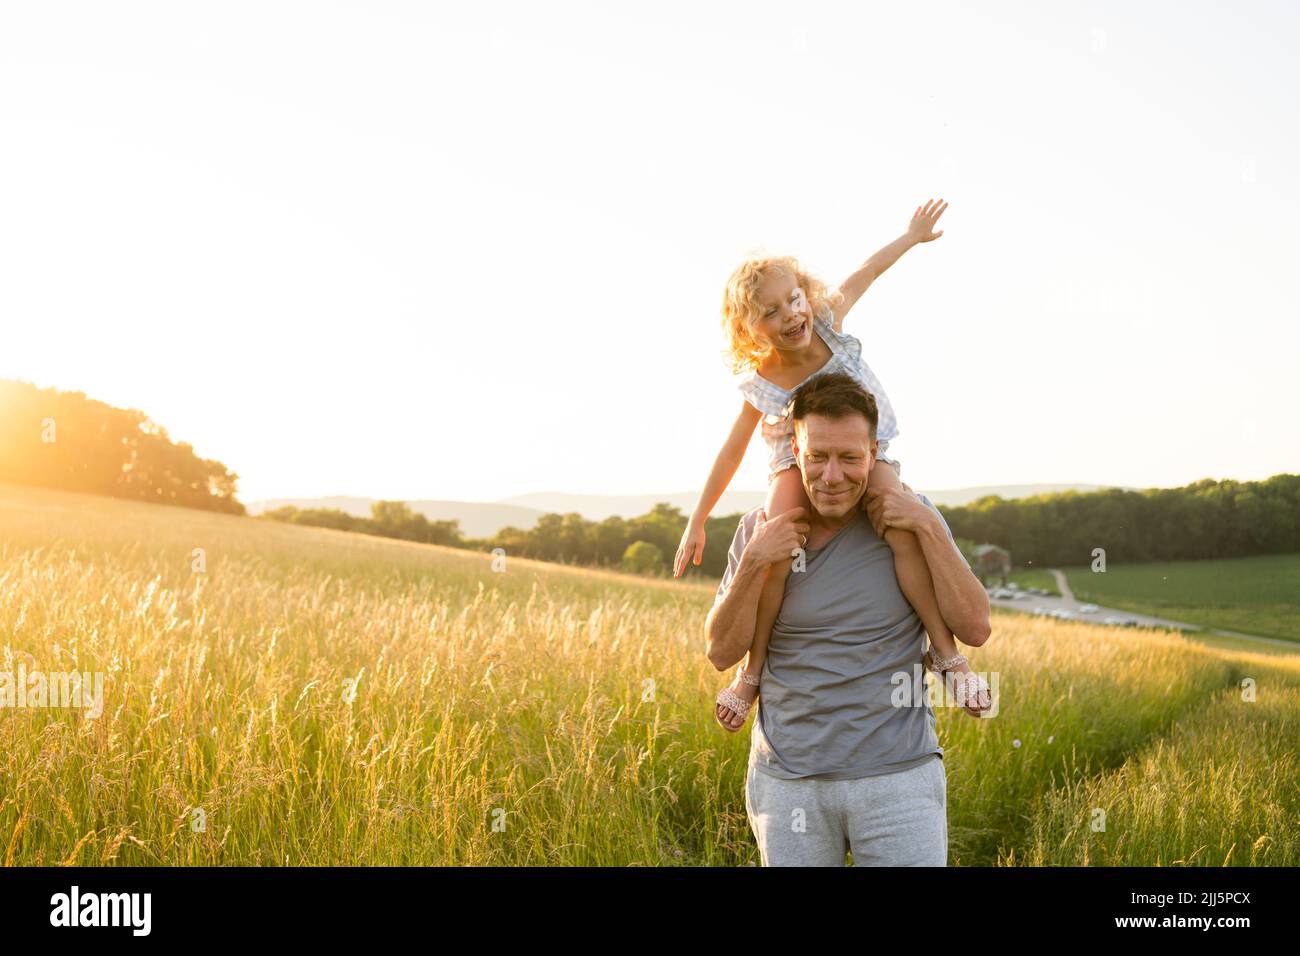 Smiling man carrying daughter sitting with arms outstretched at field Stock Photo